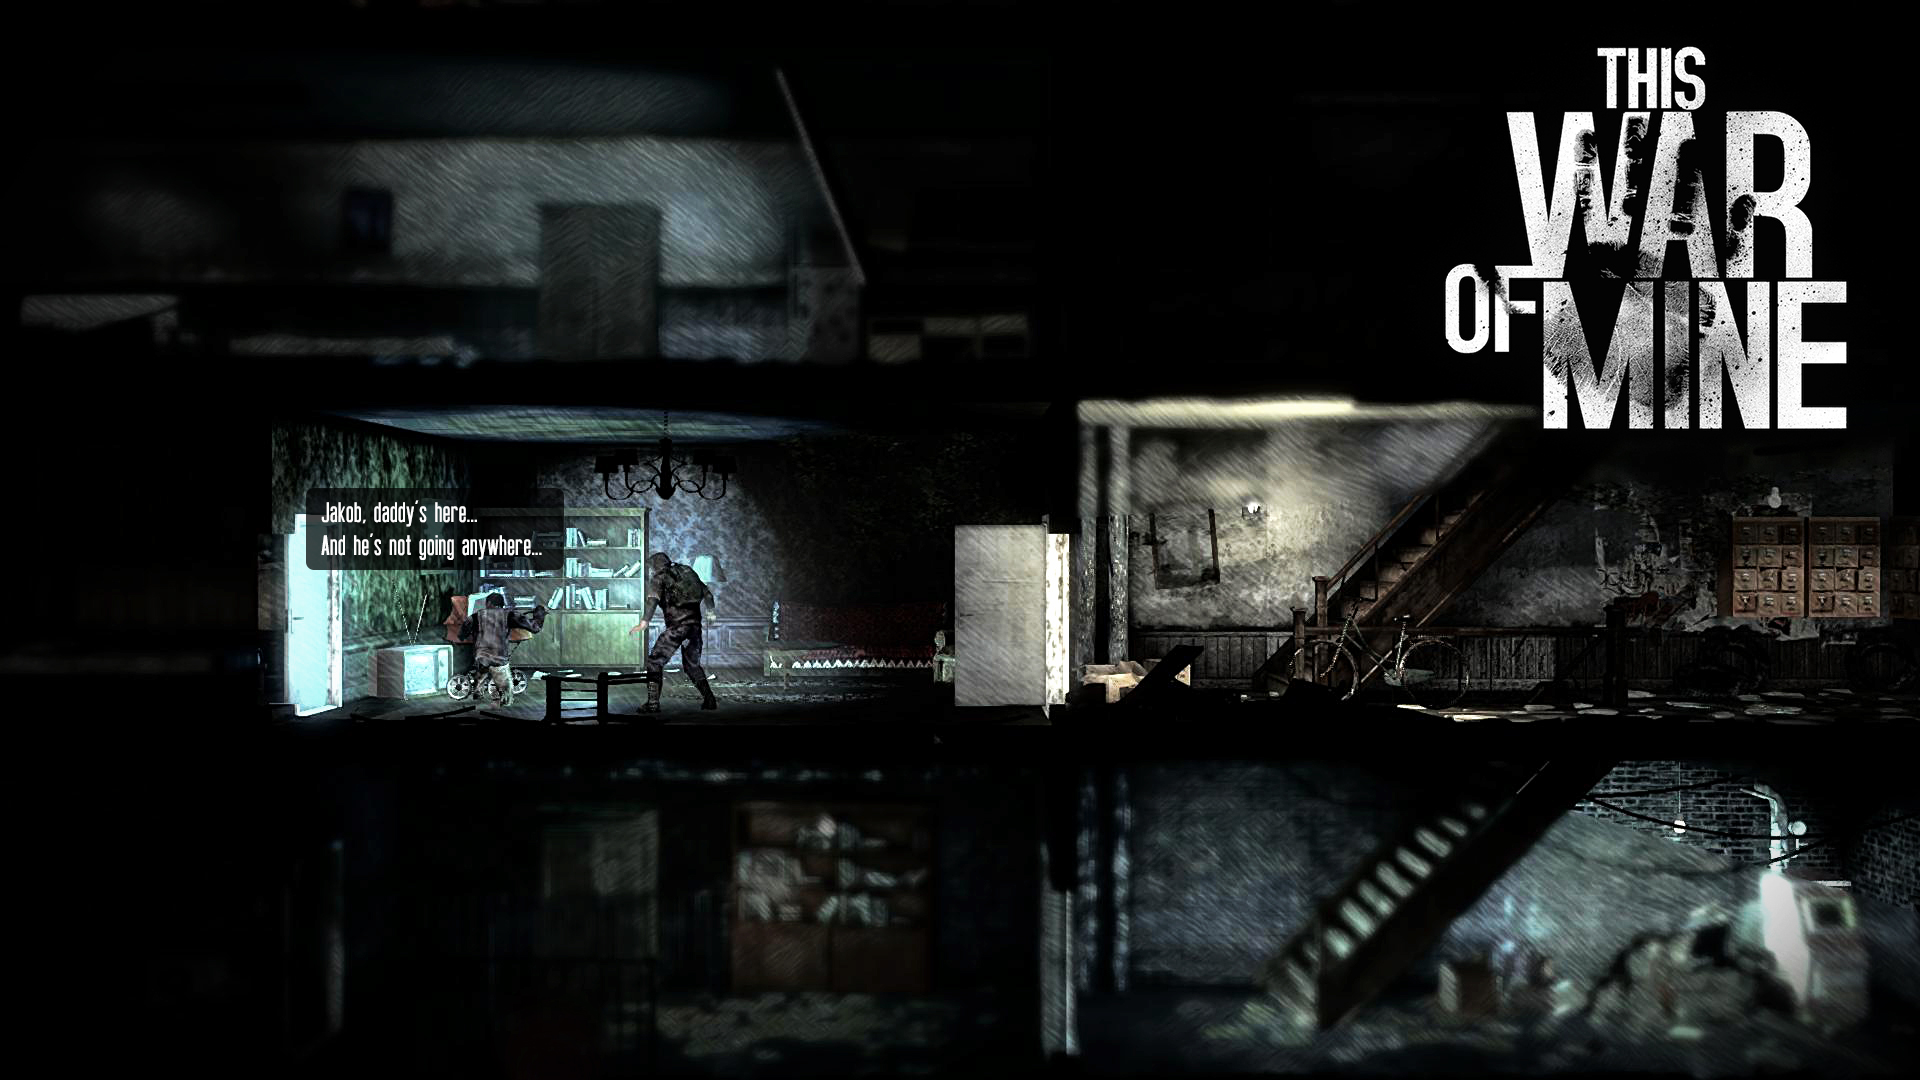 This war of mine: war child charity download free. full